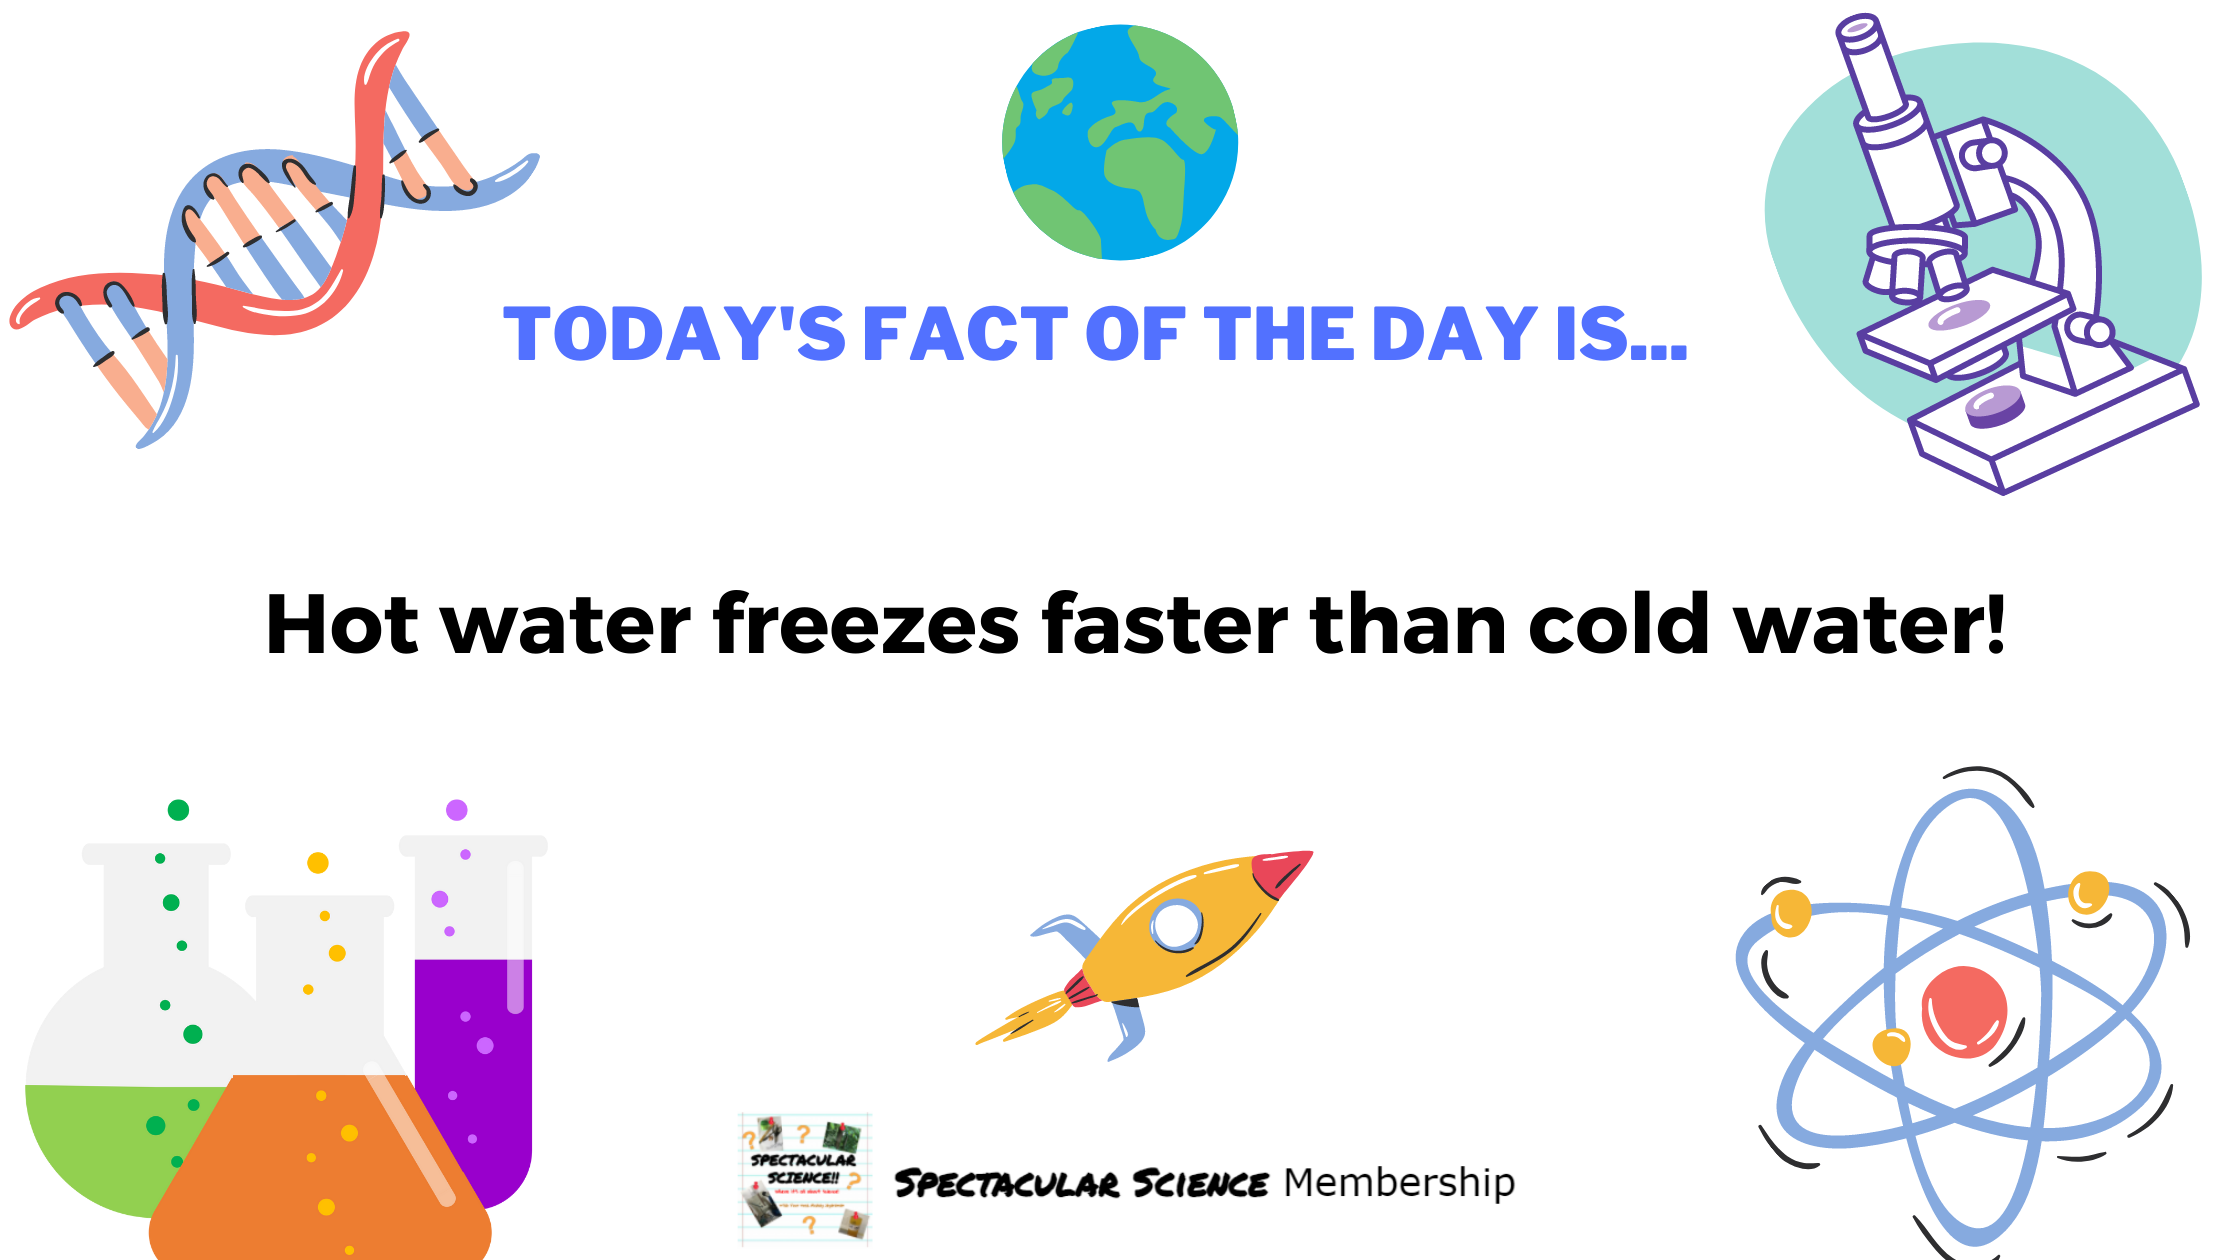 Fact of the Day Image Dec. 12th